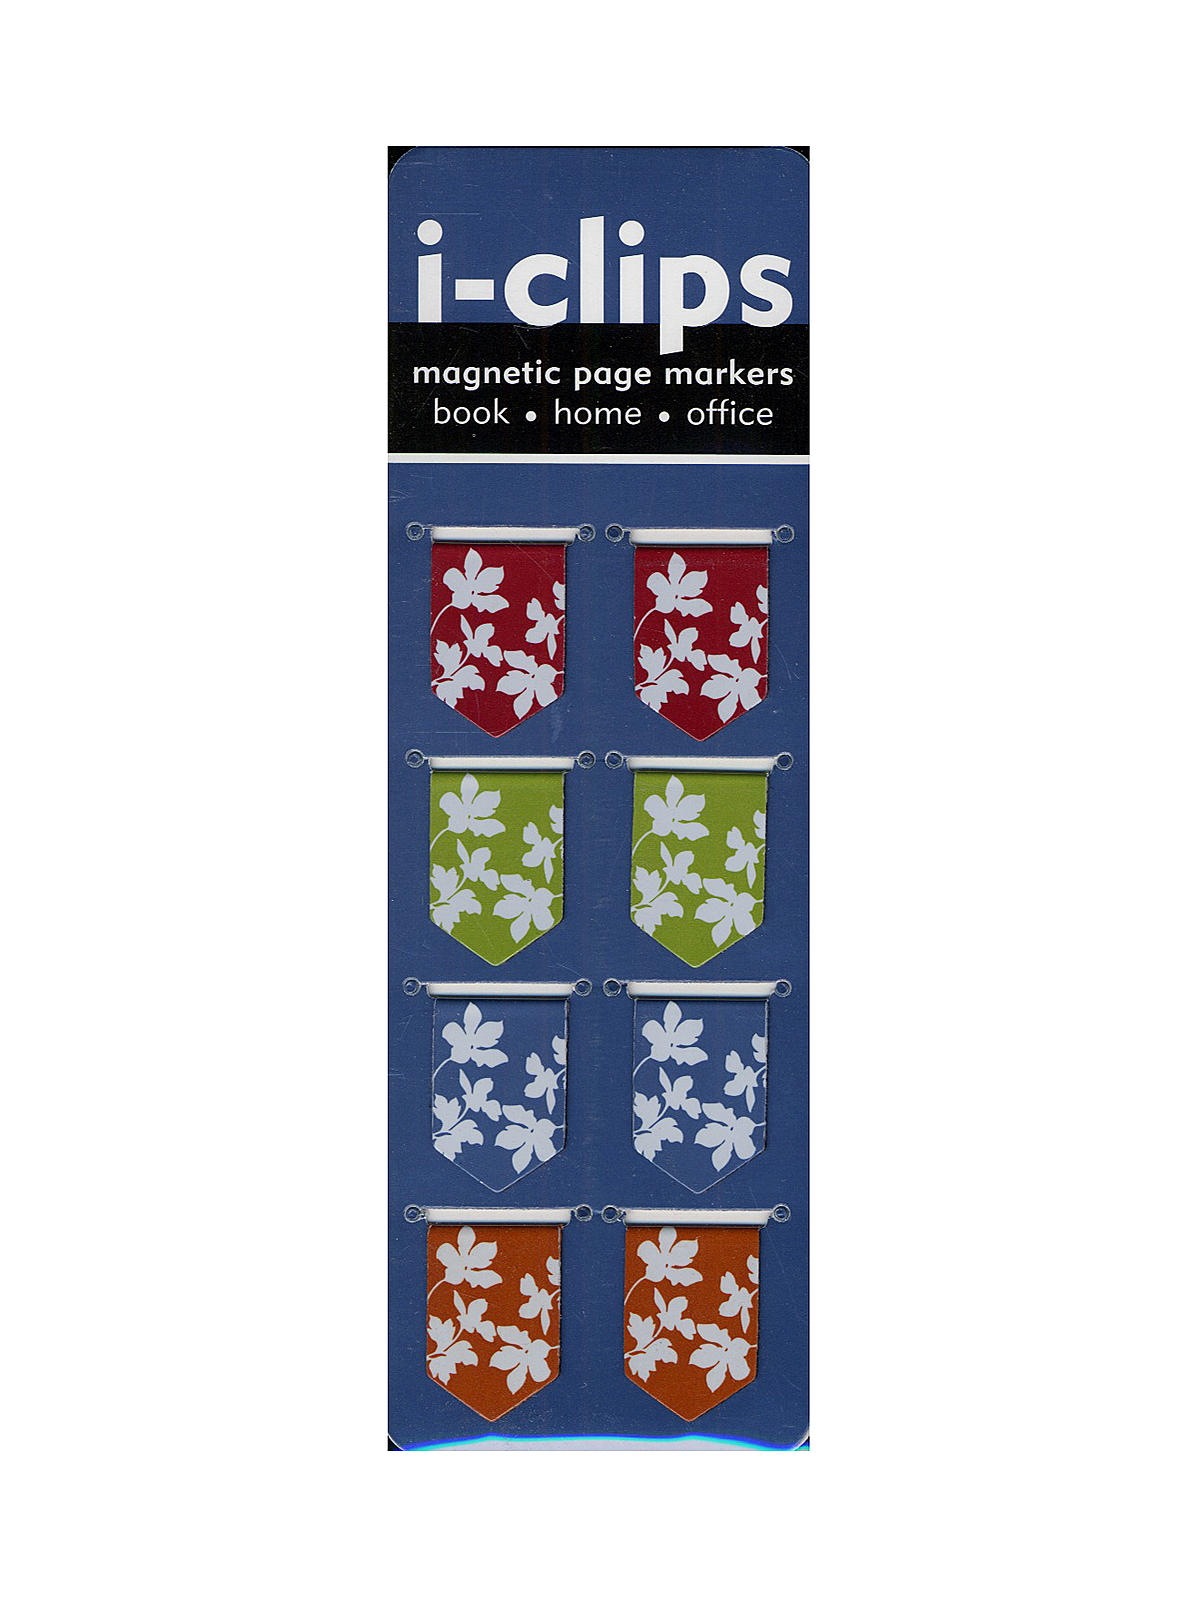 I-clips Magnetic Page Markers Floral Silhouette